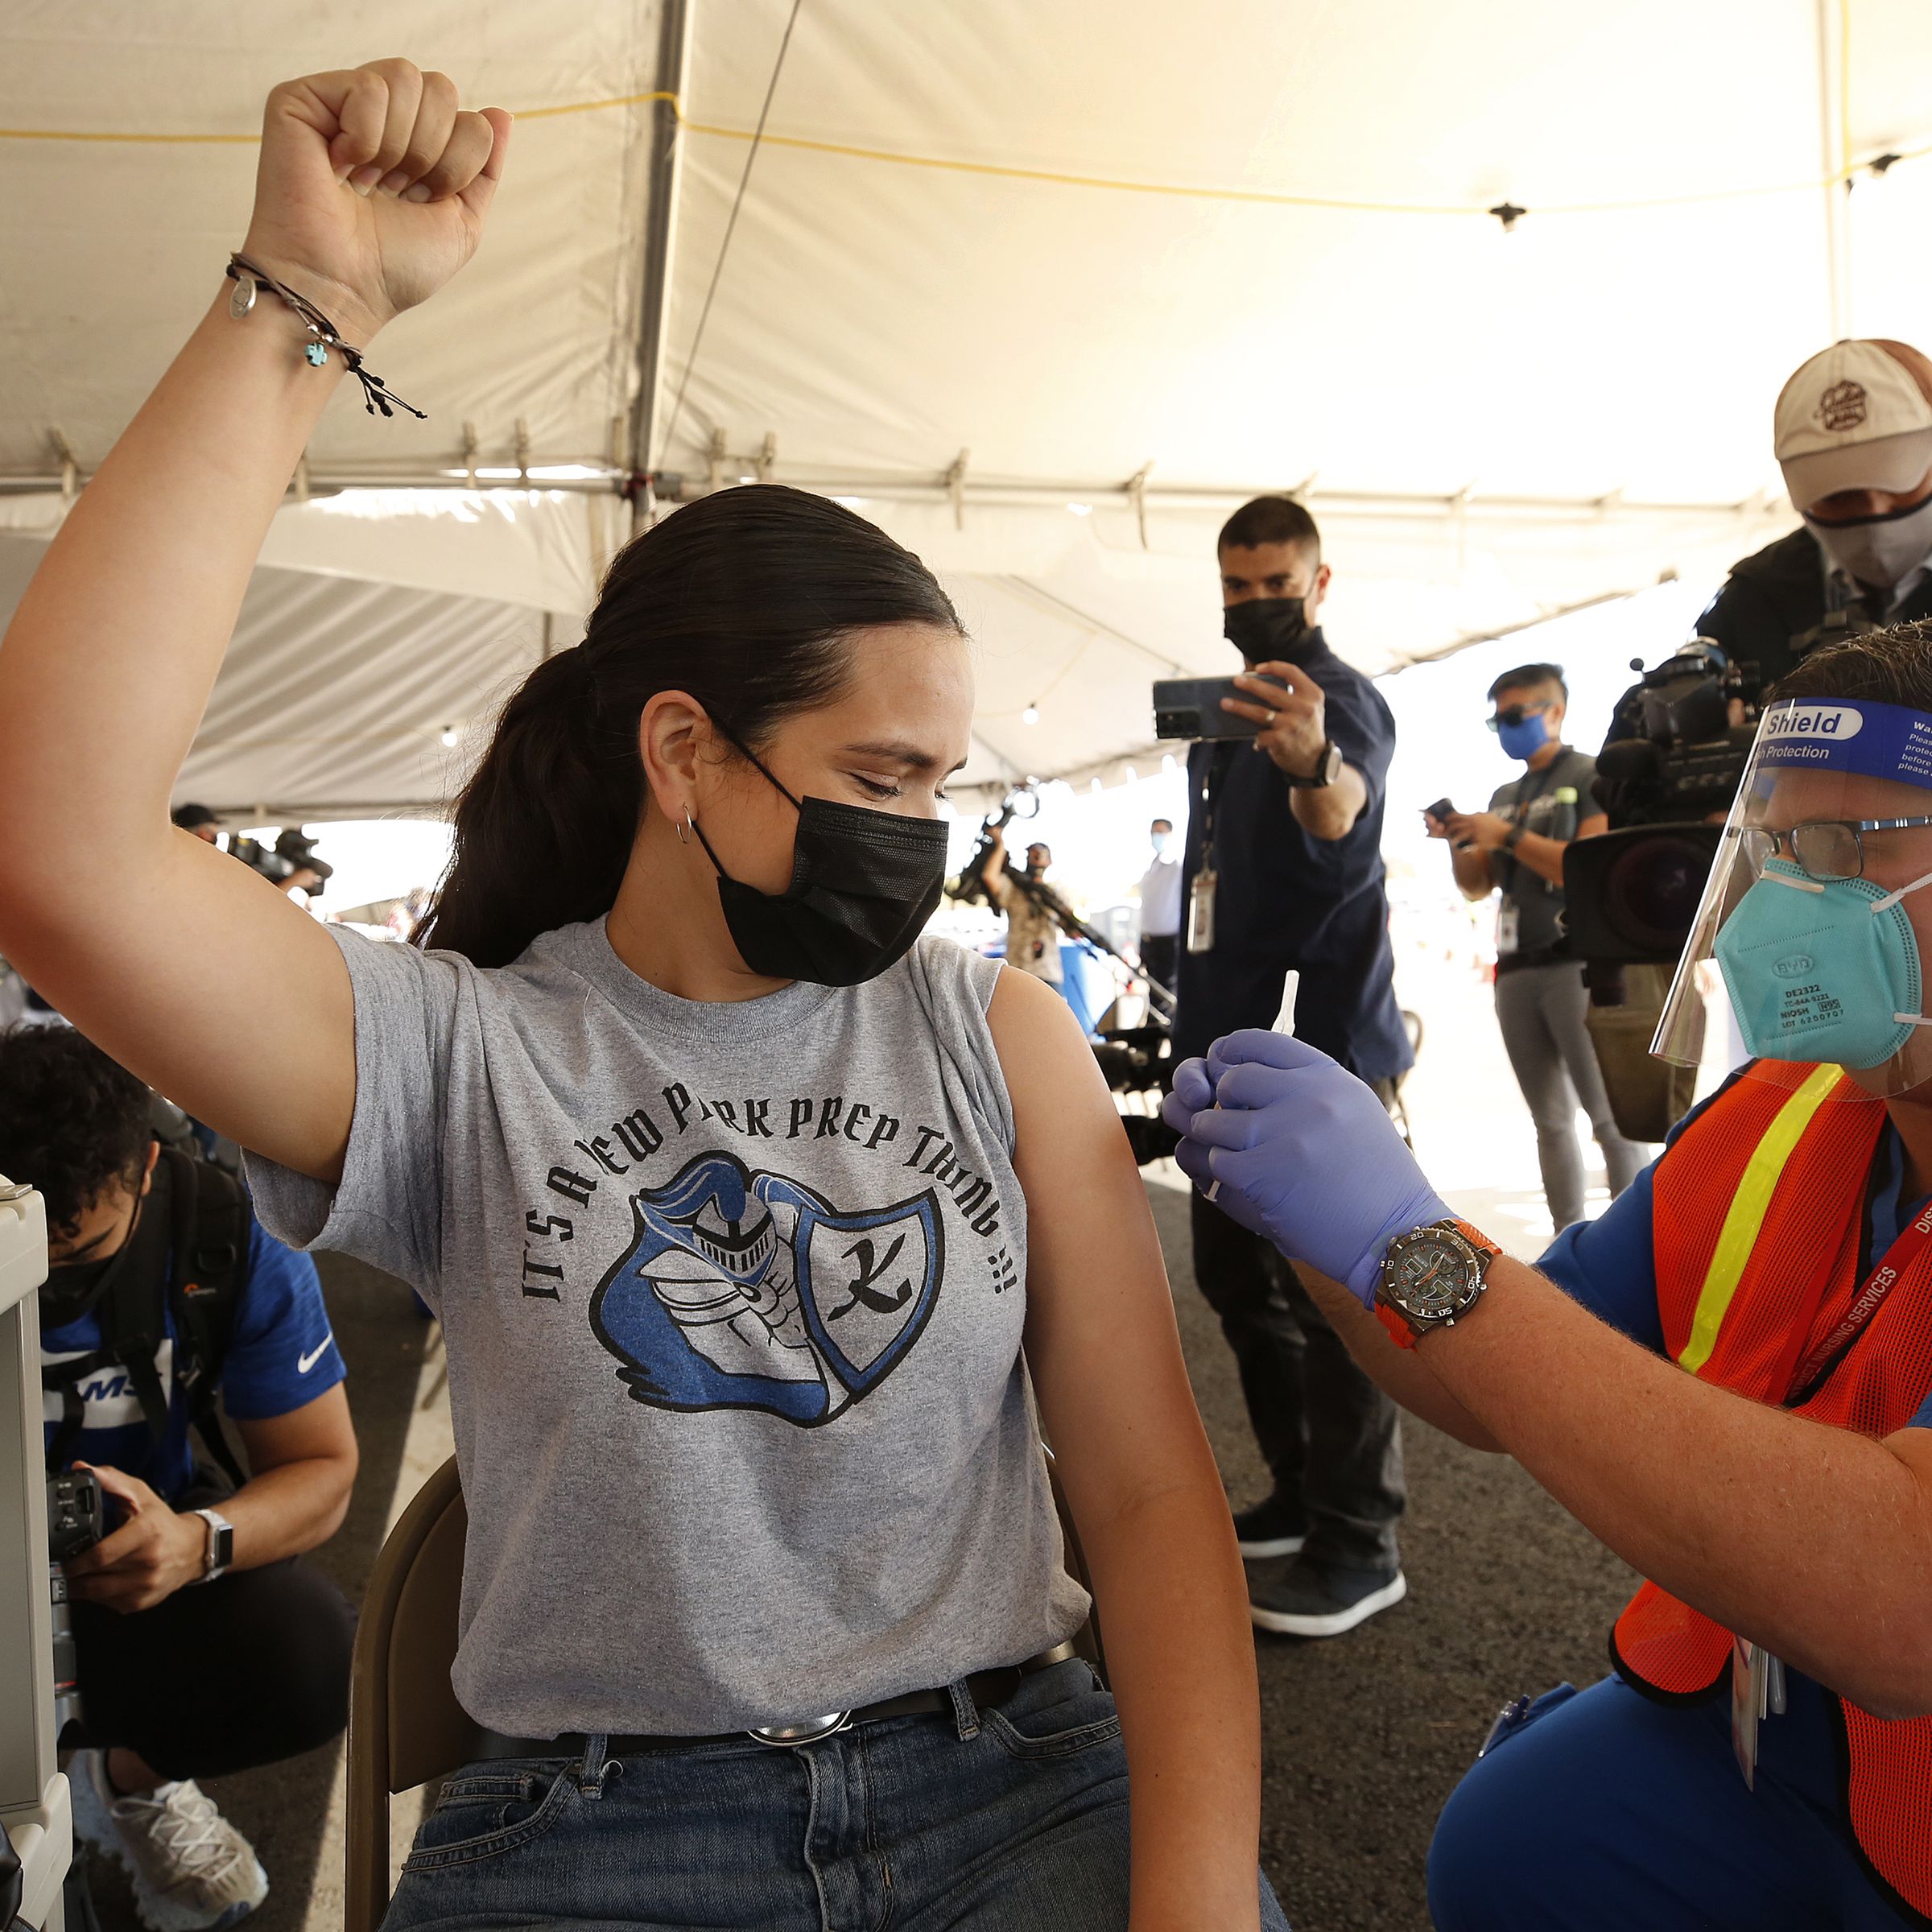 L.A. Unified opened the nations largest vaccination site specifically for education employees at SoFi stadium Monday morning using the Daily Pass, Los Angeles Unifieds new technology and data system that coordinates health checks, COVID tests and vaccinati